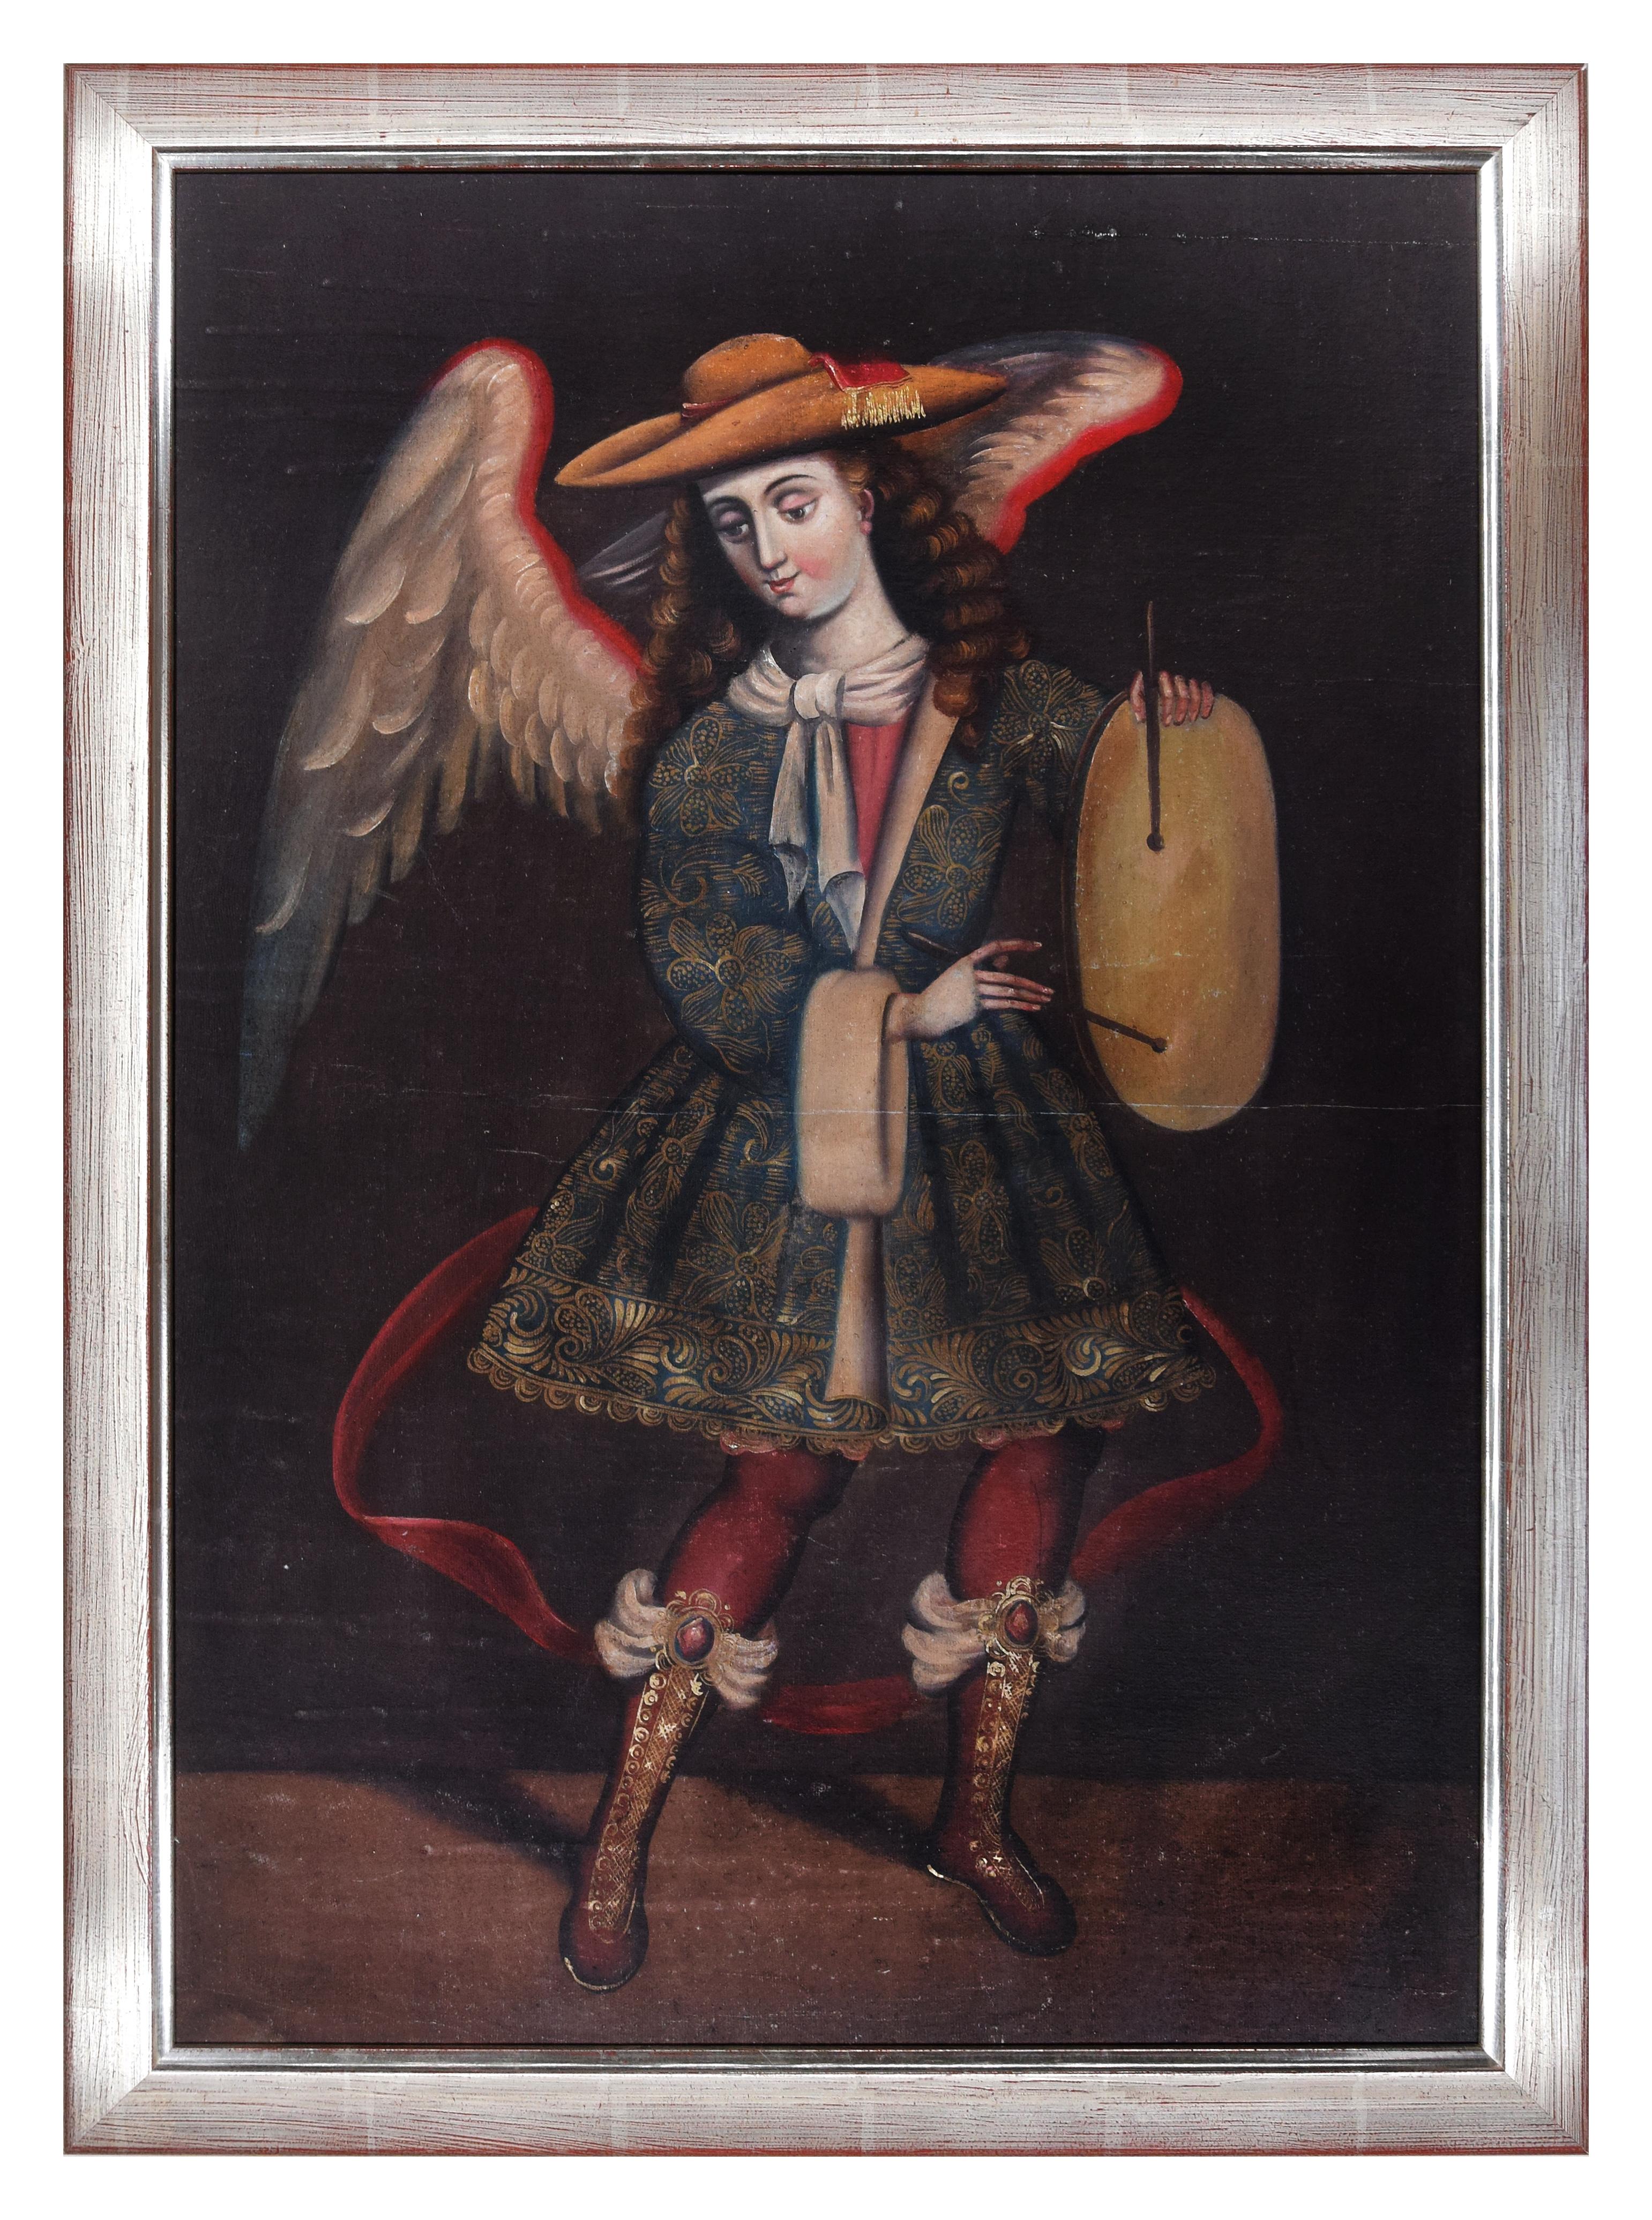 Unknown Figurative Painting - Angel with Drum - Original Oil, Tempera and Gold on Canvas - End of 19th Century